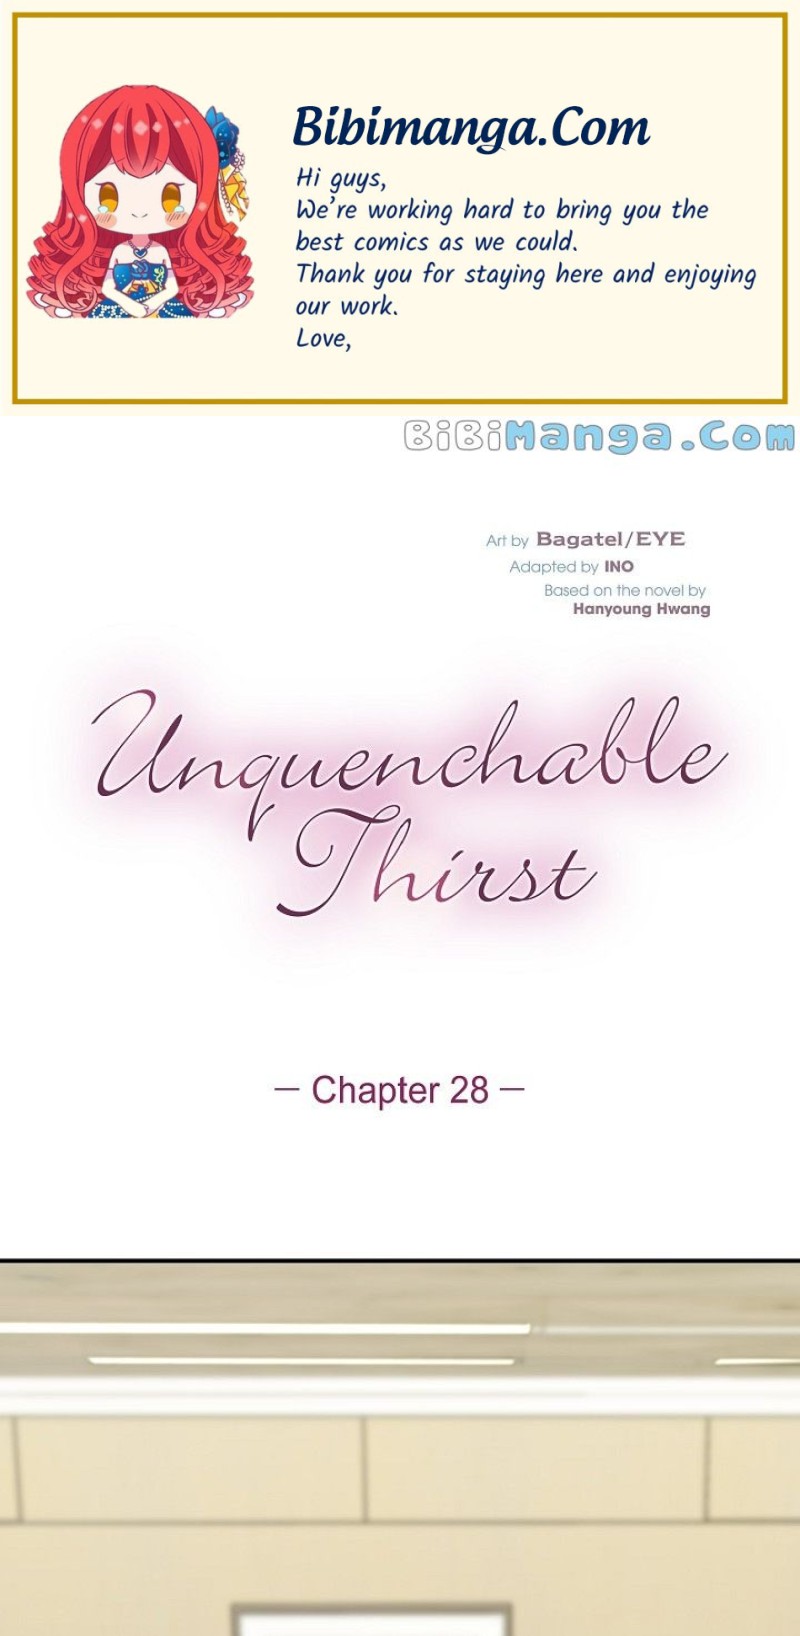 Unquenchable Thirst chapter 28